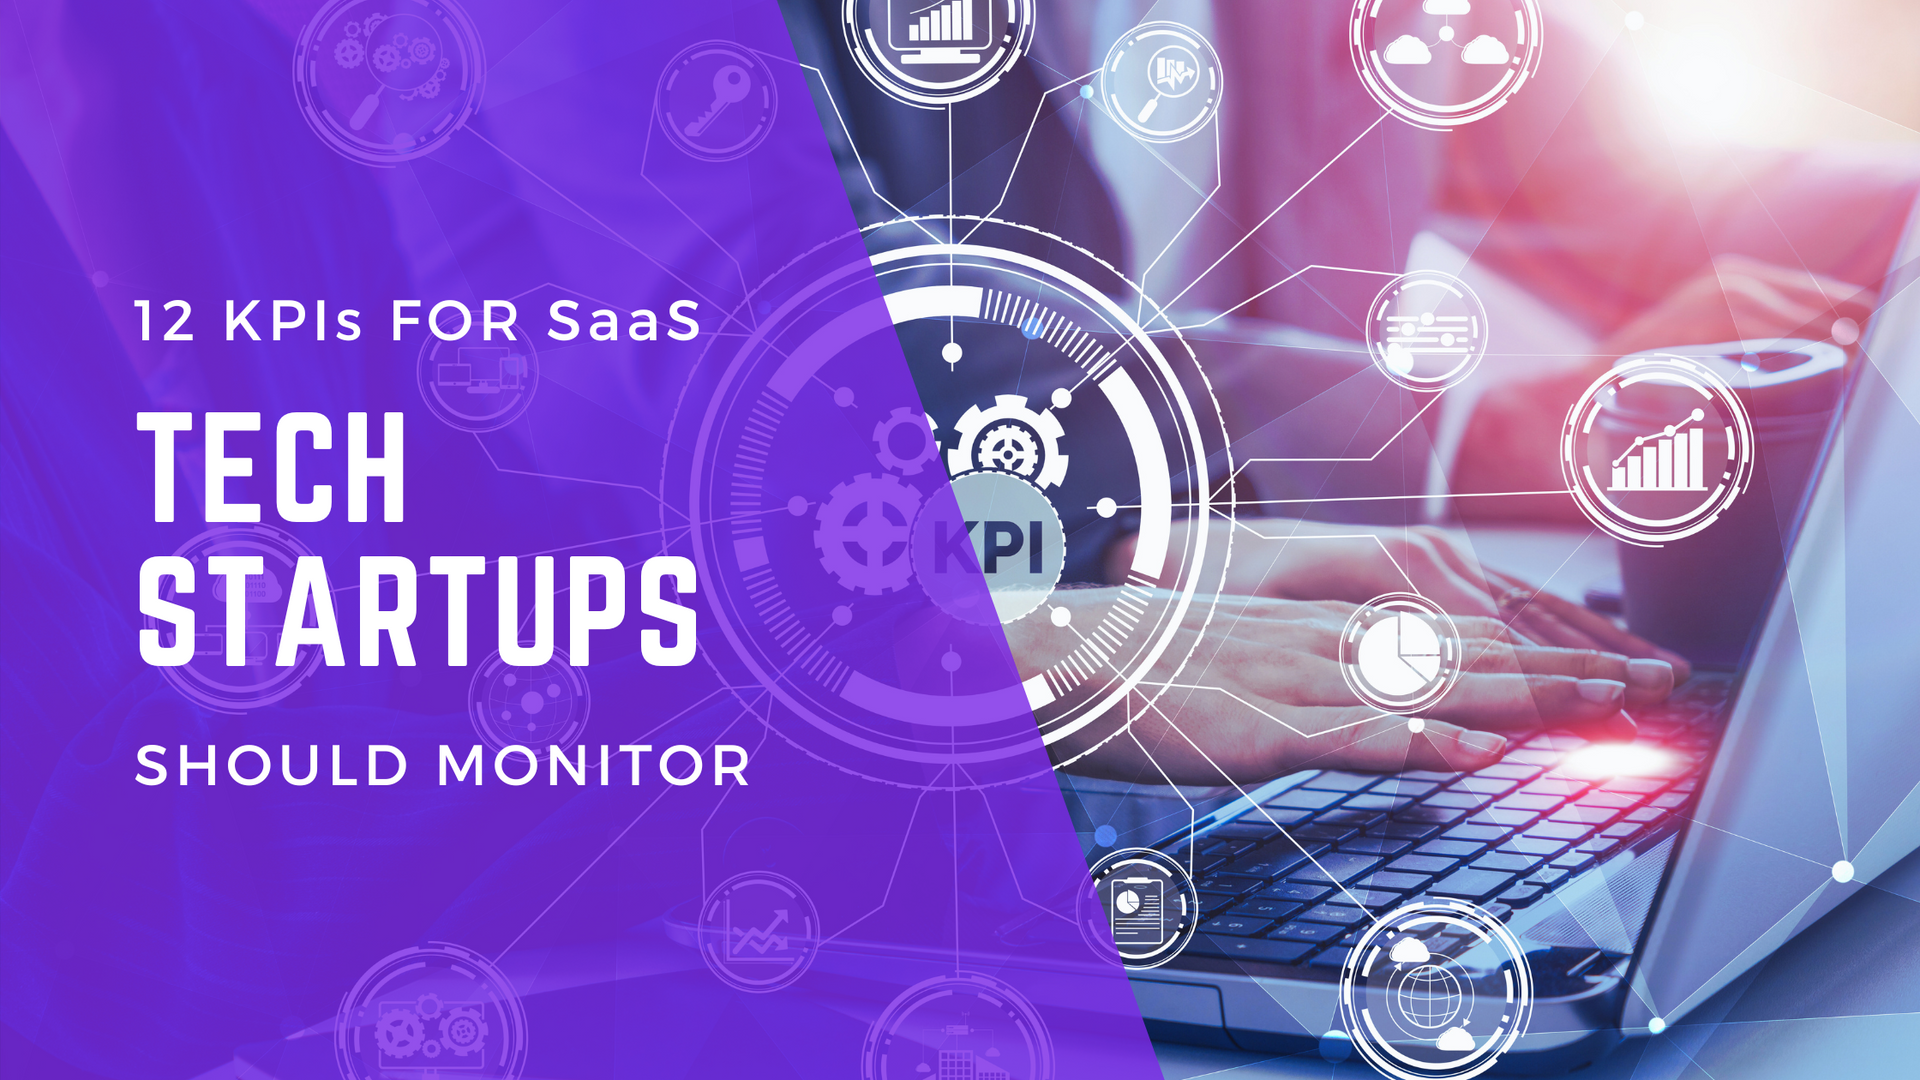 12 KPIs for SaaS Tech Startups should monitor | OnTheGo Accountants